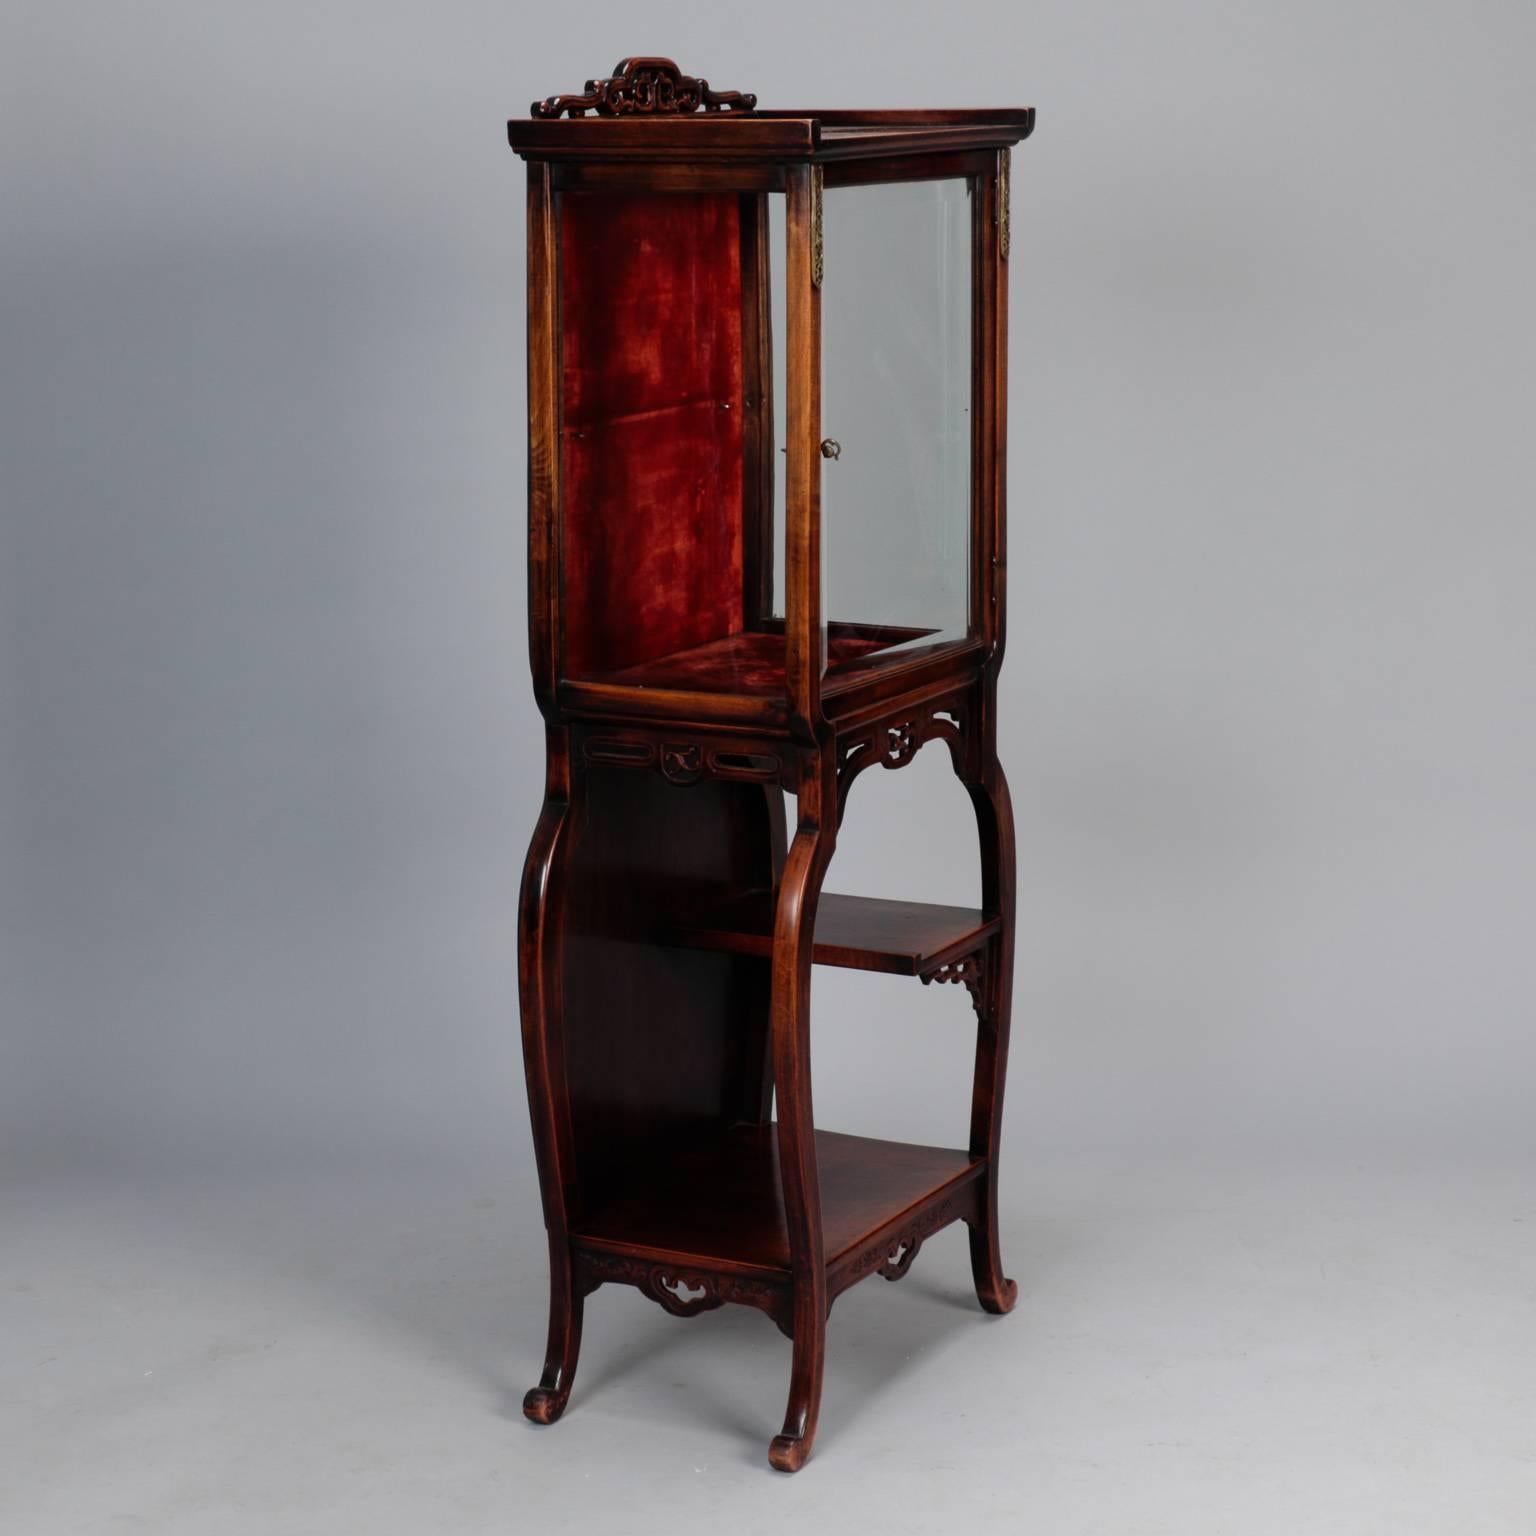 20th Century Tall Narrow Chinese Carved Wood Display Cabinet